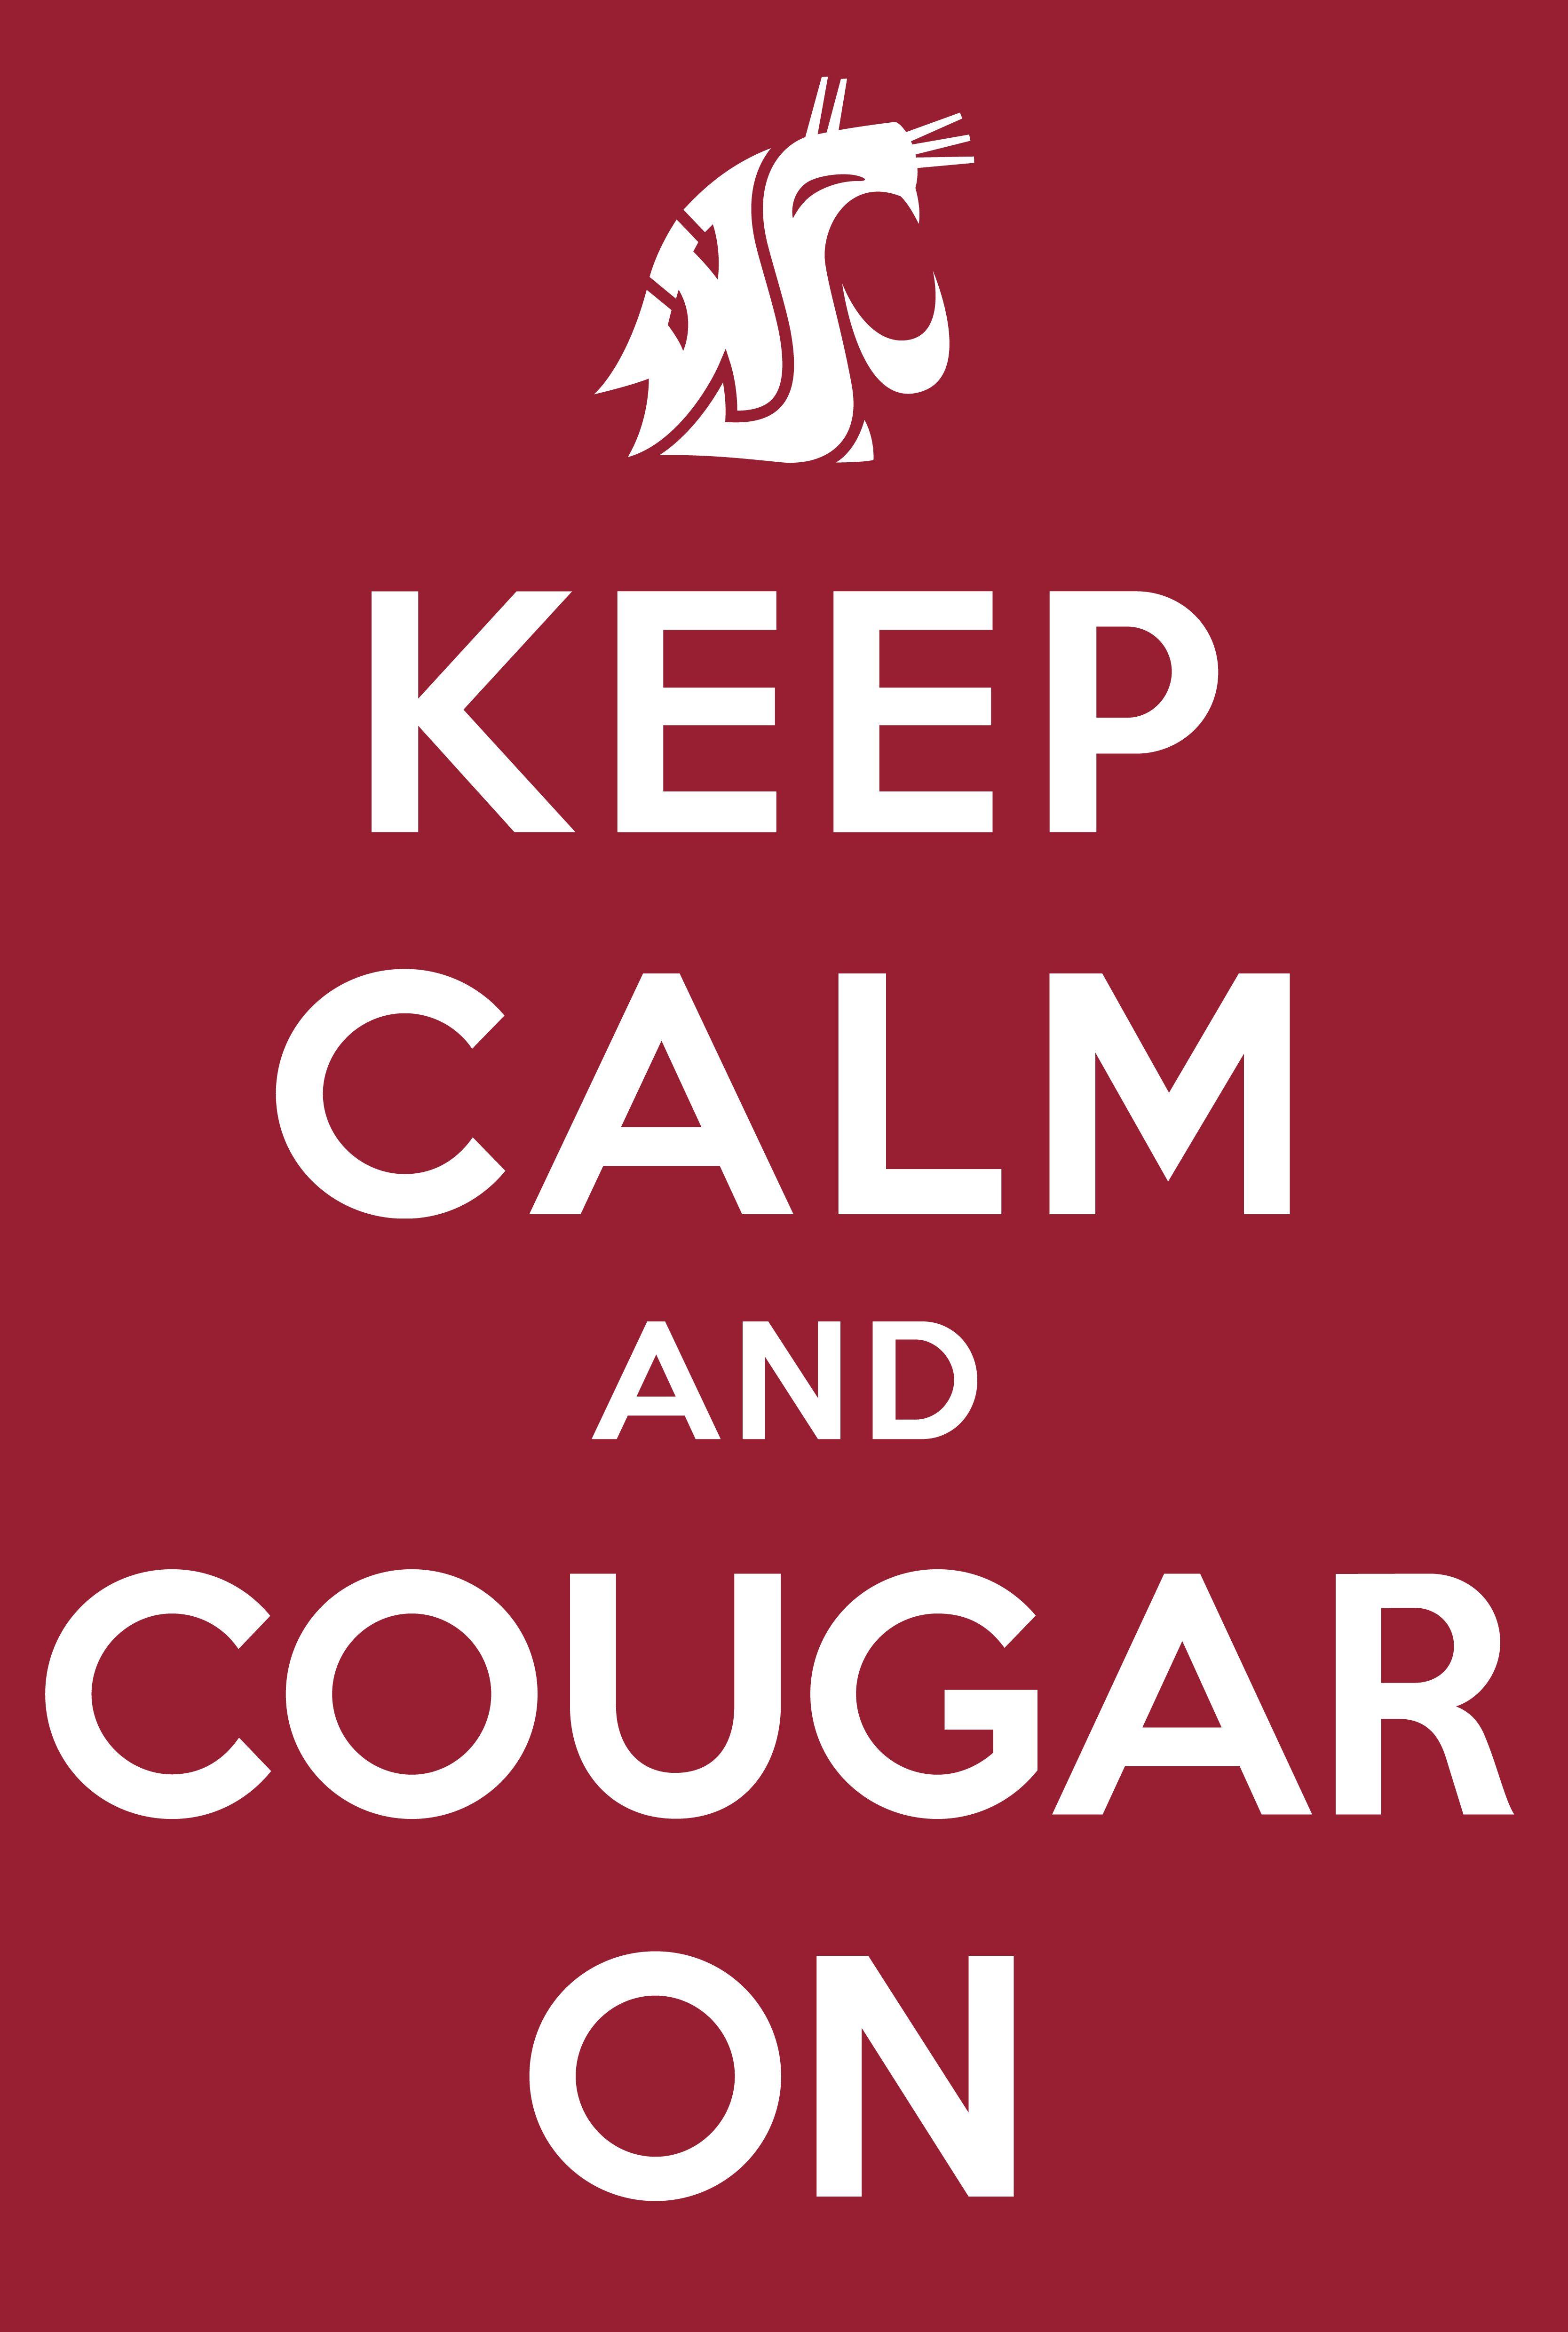 Keep Calm and Cougar On. Go Cougs!. CougShirts